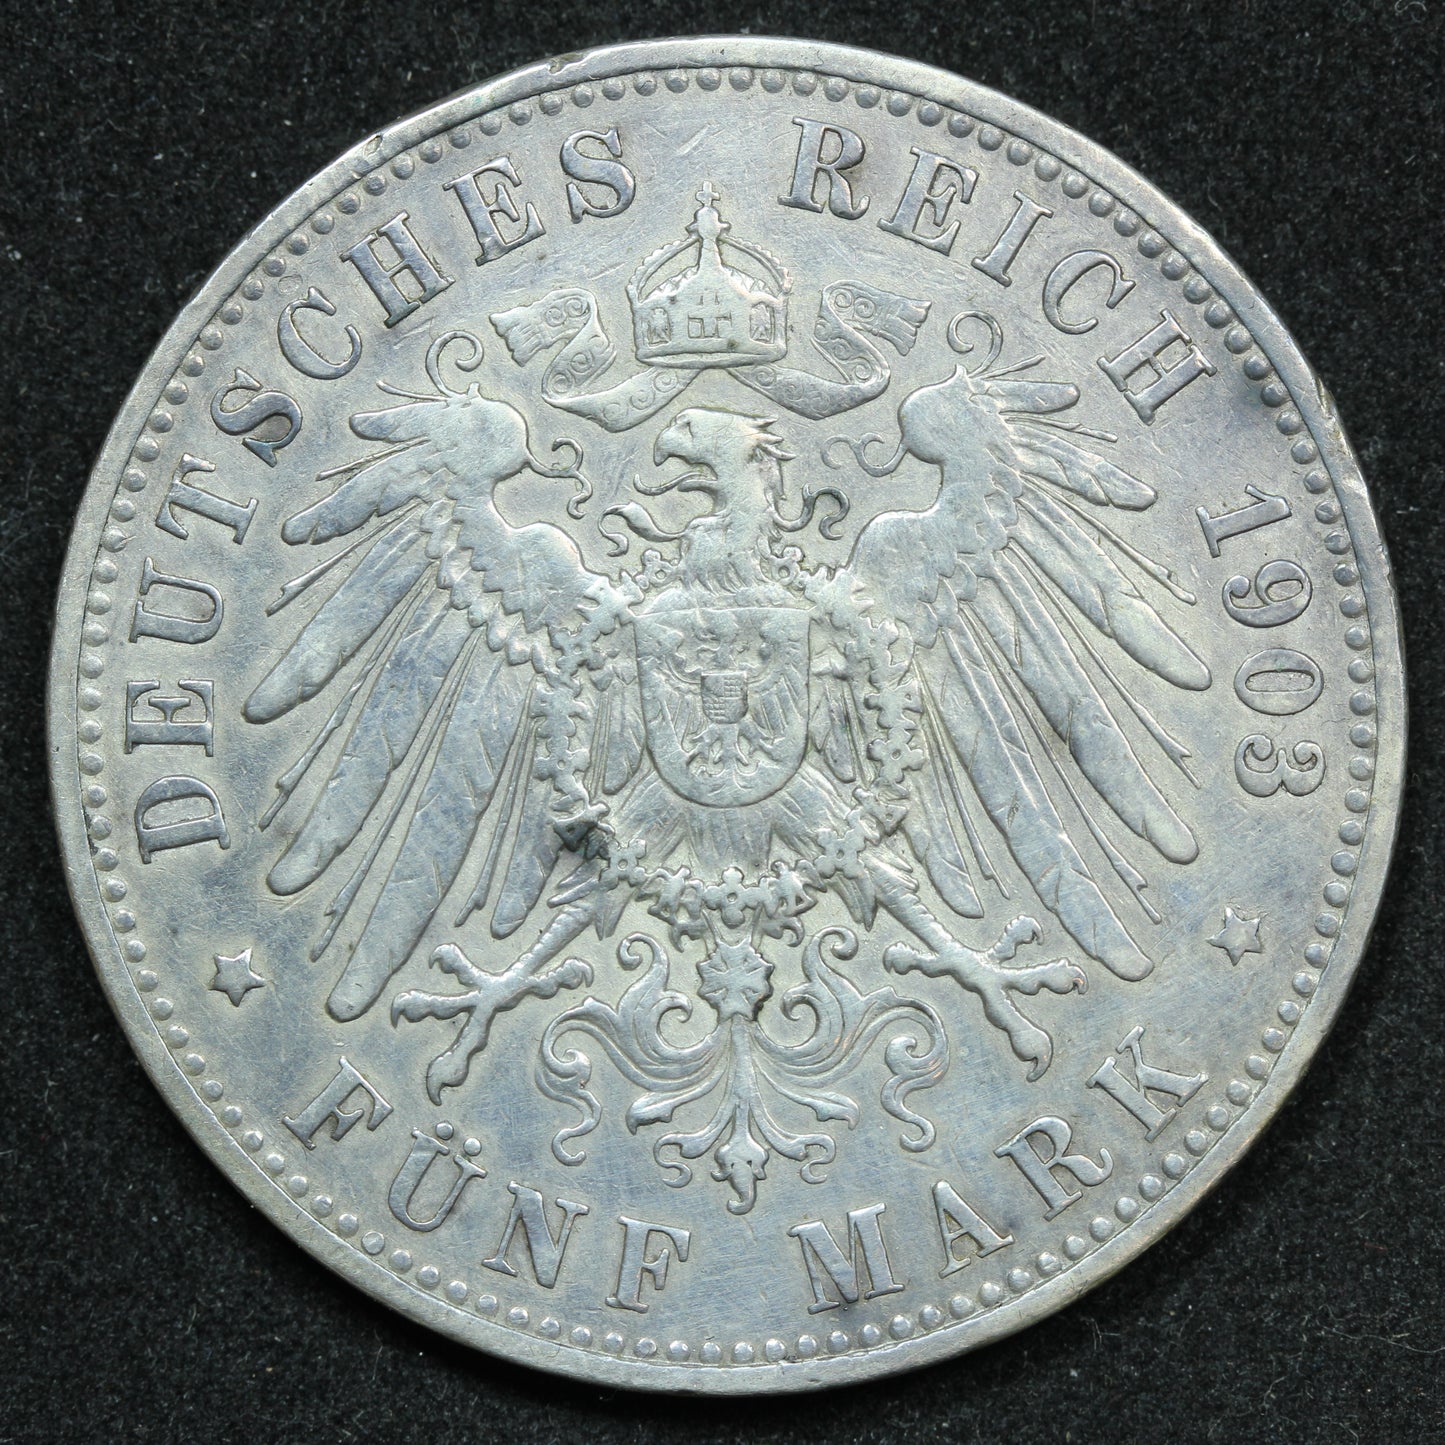 1903 A German States Prussia 5 Funf Mark Silver Coin - KM# 523